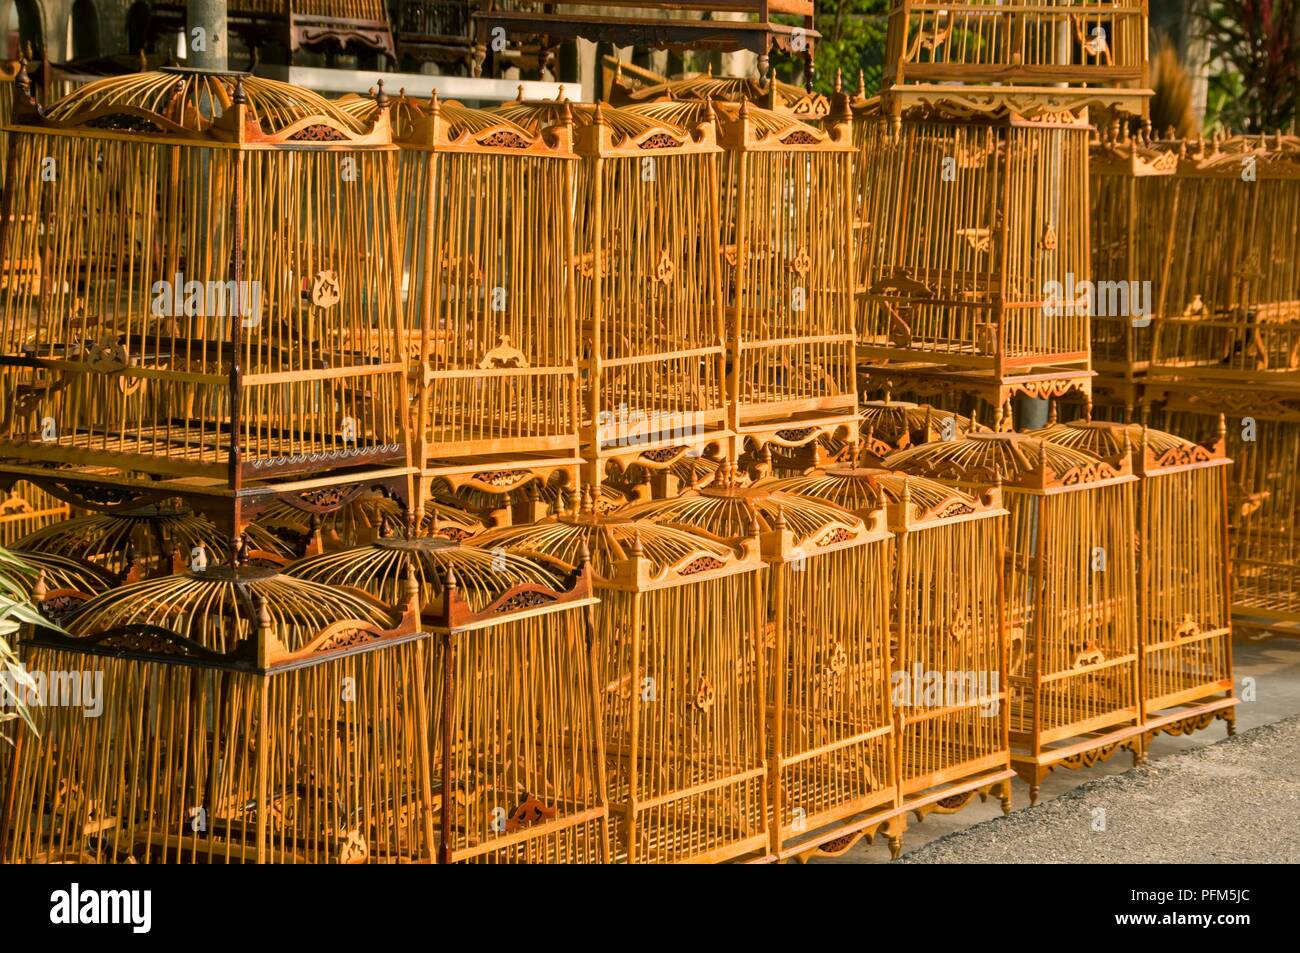 Thailand, Hat Sa Bua, birdcages for sale at the side of a road Stock Photo